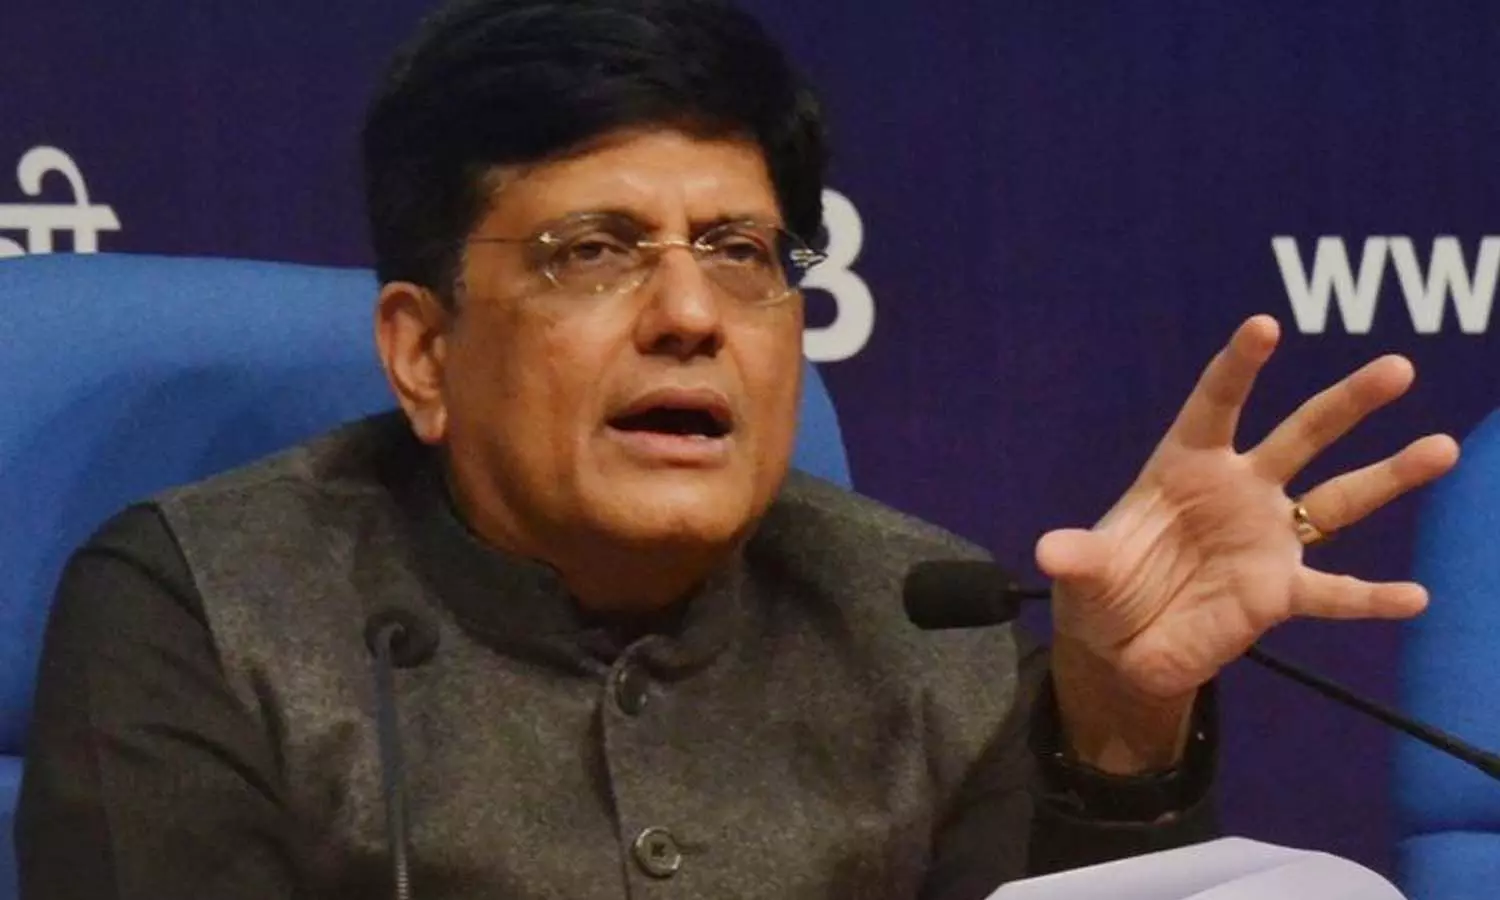 Improvement in law and order in UP has made doing business much easier and safer: Piyush Goyal